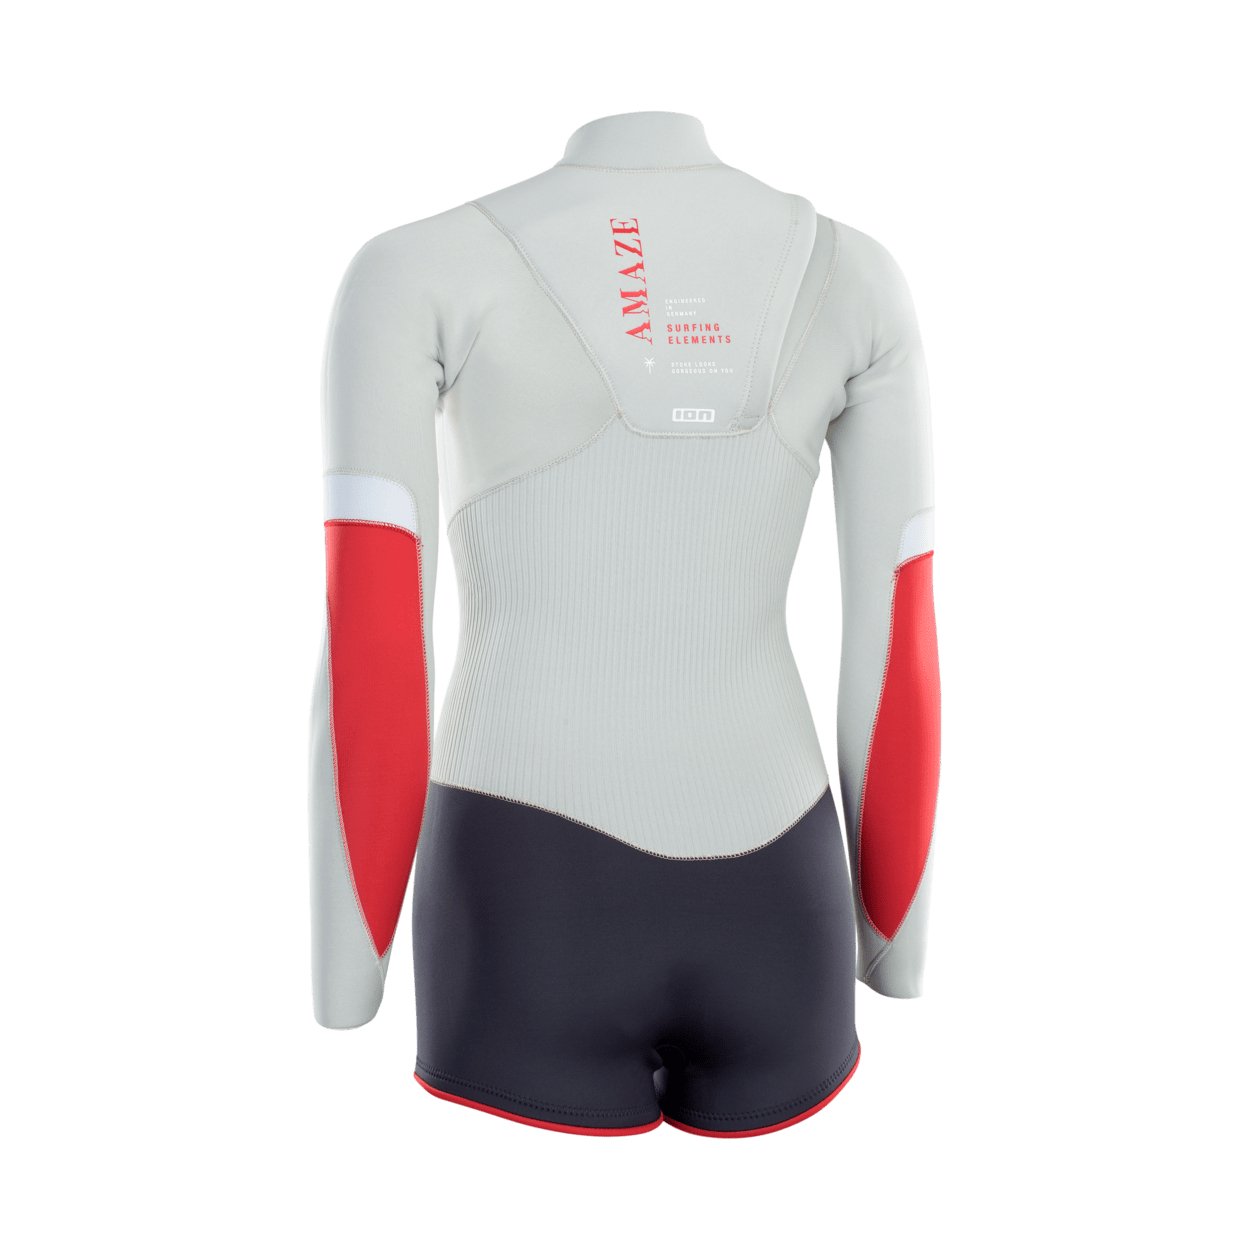 ION Amaze Shorty LS 2.0 NZ DL 2021 - Worthing Watersports - 9008415953639 - Wetsuits - ION Water